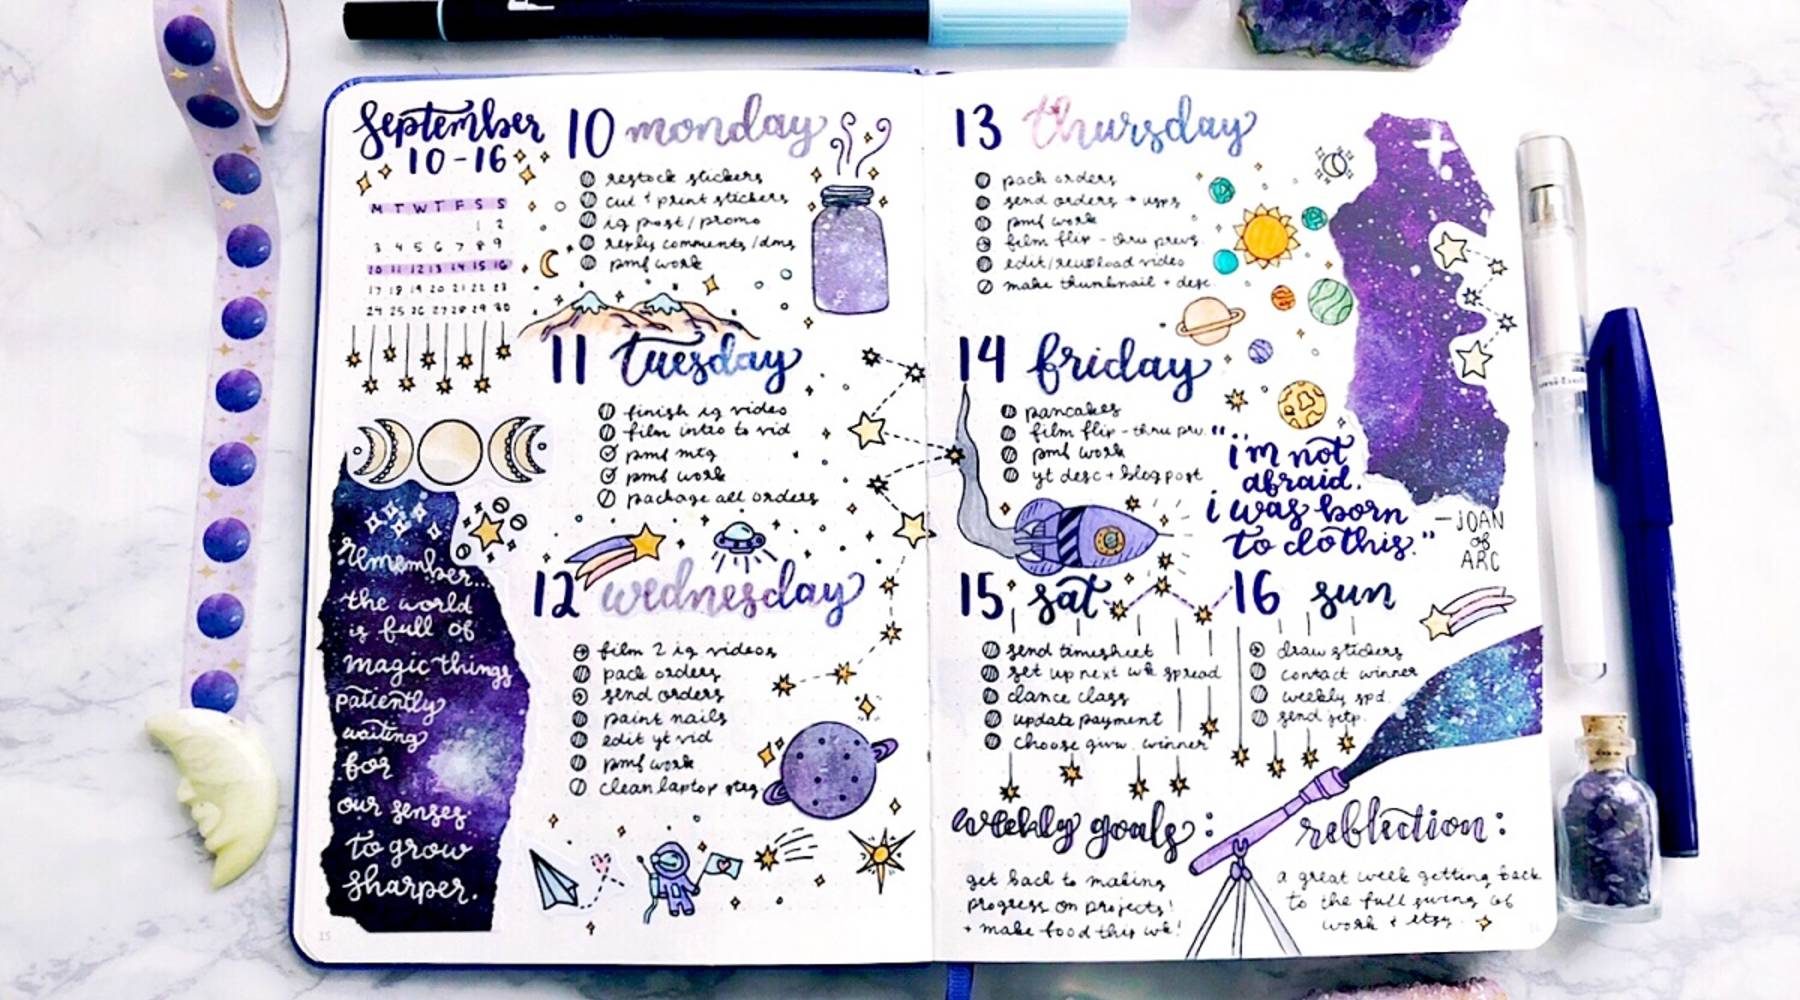 So you want to get into bullet journaling. Where do you start